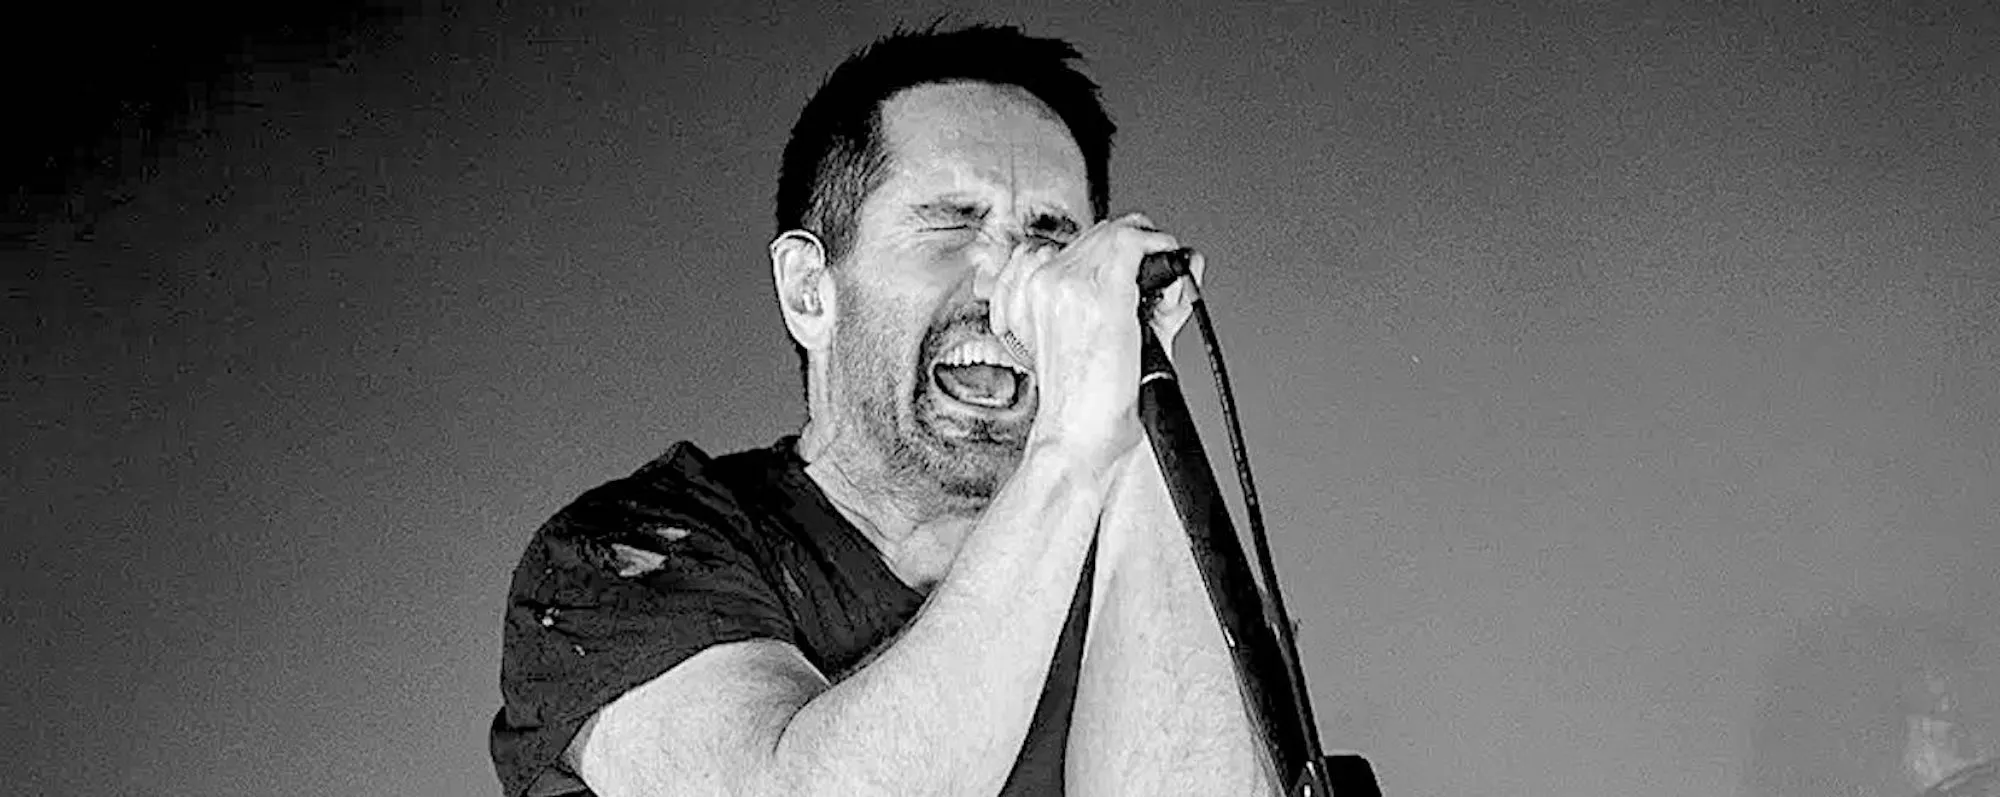 Nine Inch Nails Cancel 2021 Tour Dates Over COVID-19 Concerns